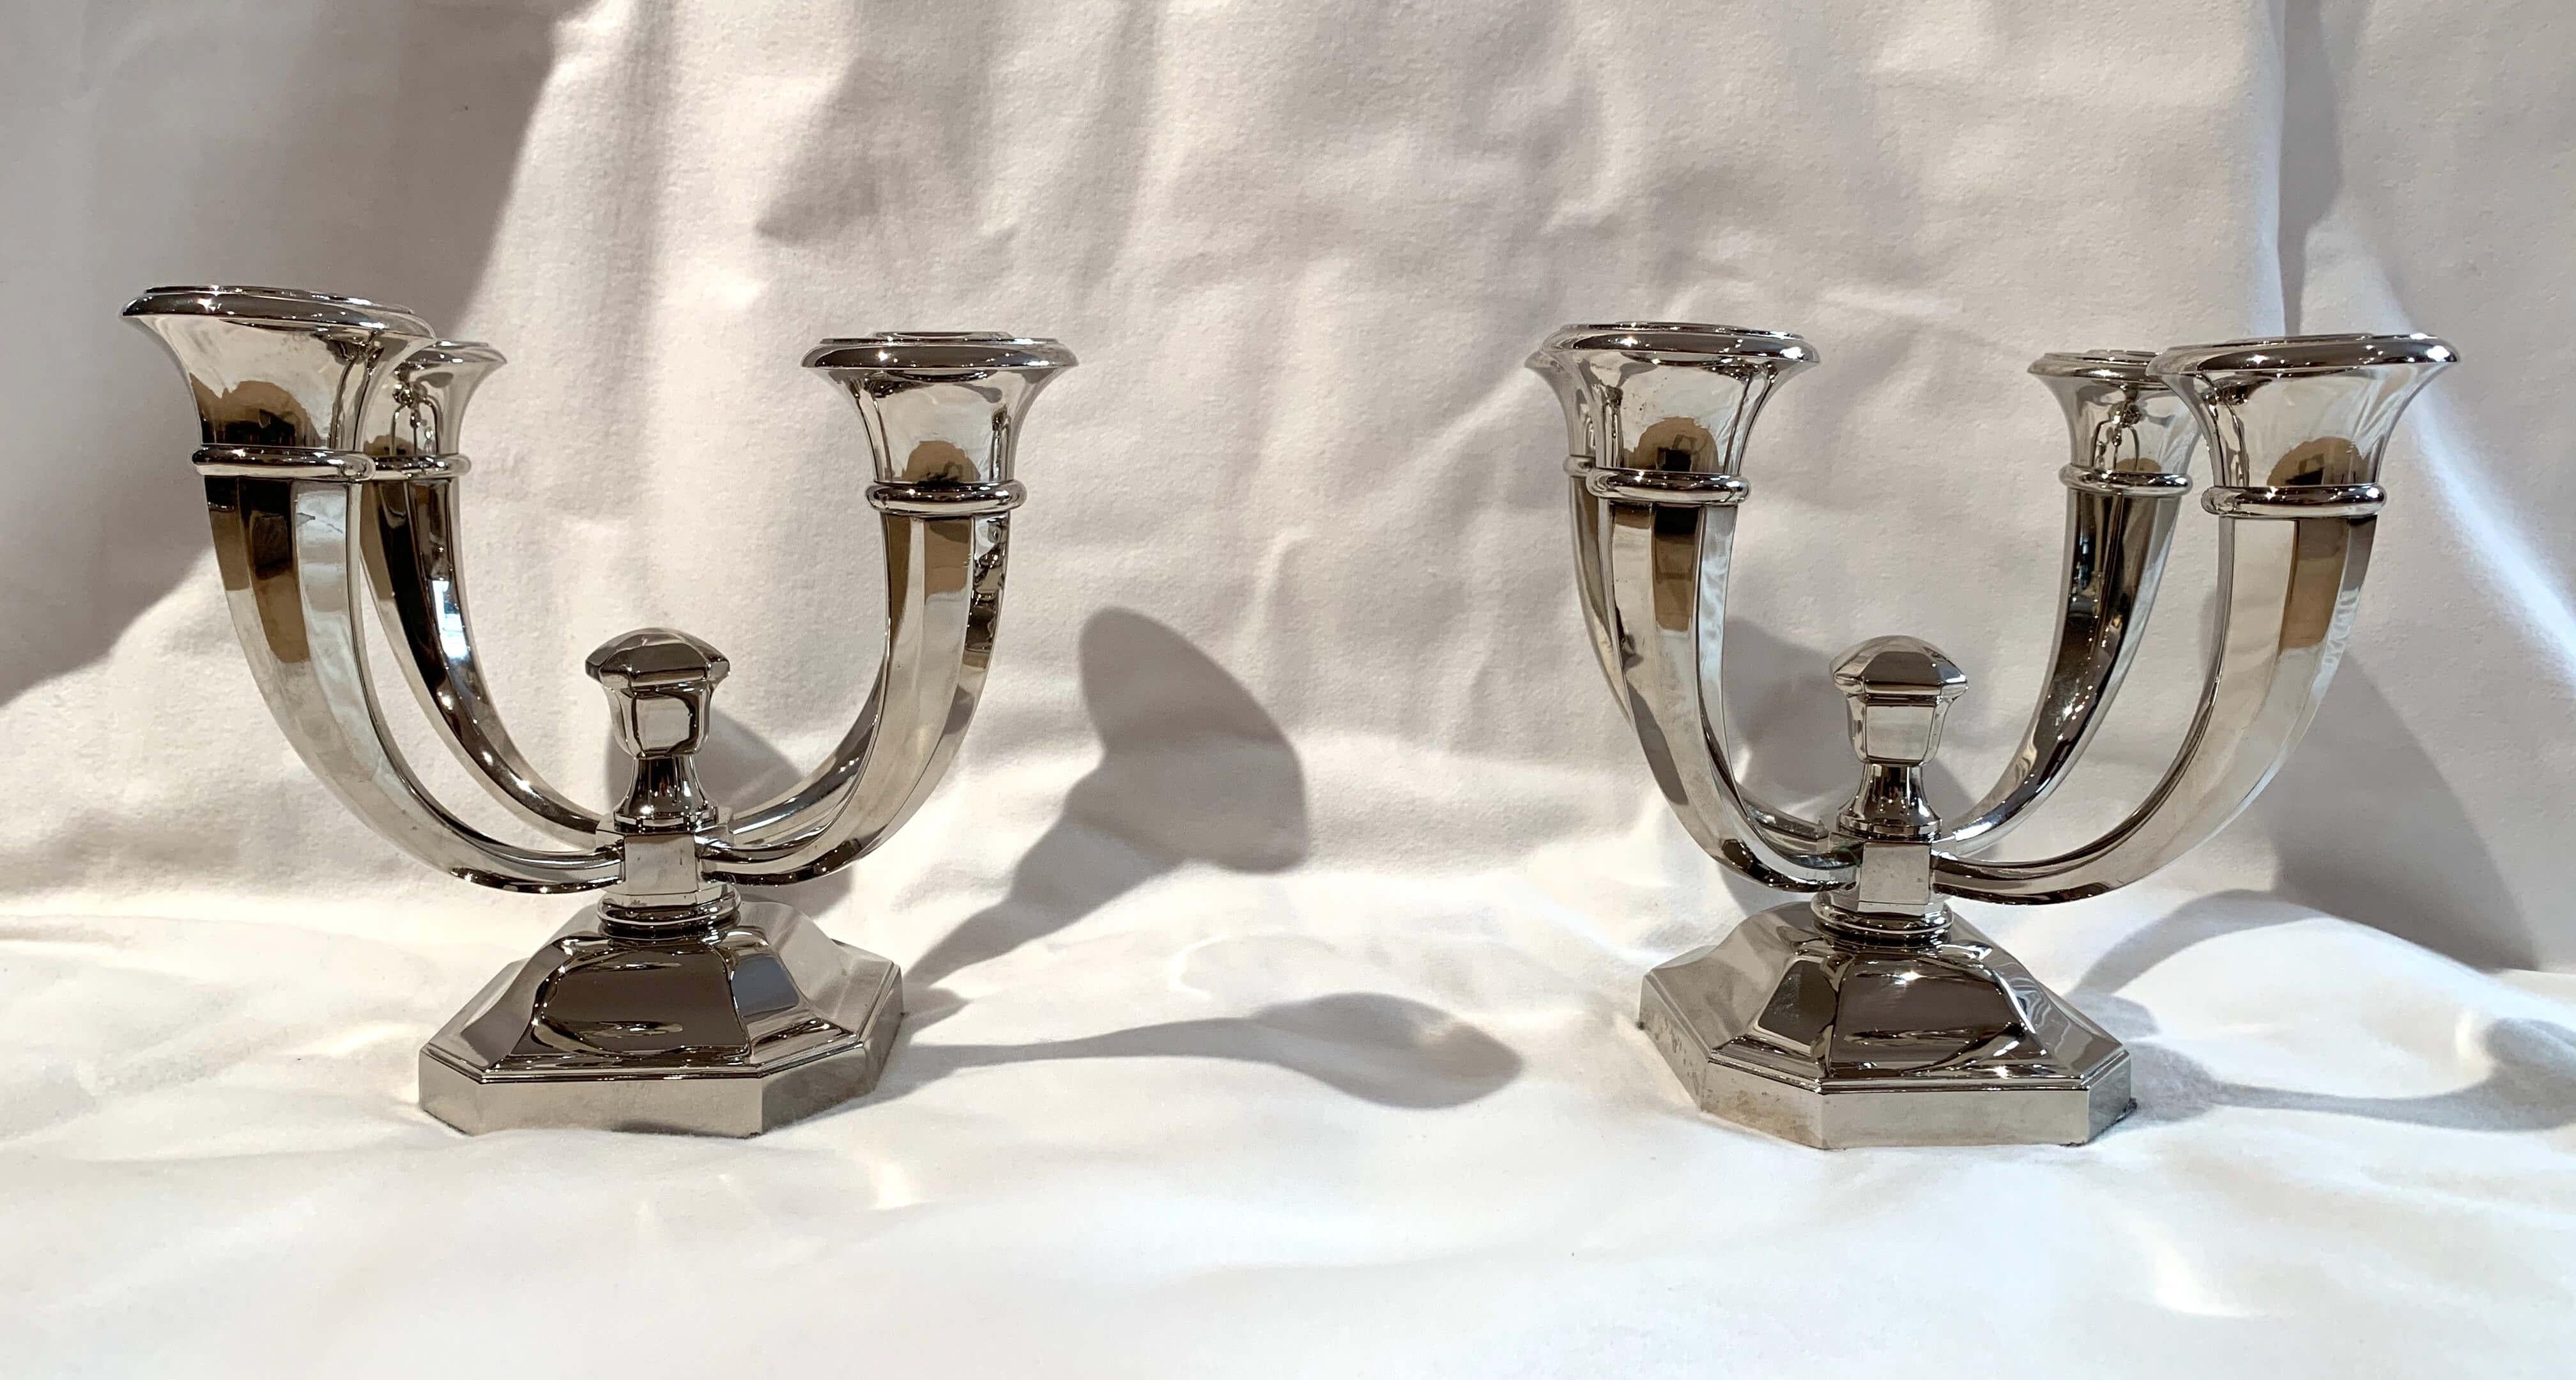 Pair of Art Deco candlesticks by J. Leleu, nickel on bronze, France, circa 1930.

Very fine and elegant pair of four-armed Art Deco candlesticks / candleholders / candelabras by Jules Leleu (1883 - 1961).
Excellent quality, heavy cast bronze (6,5